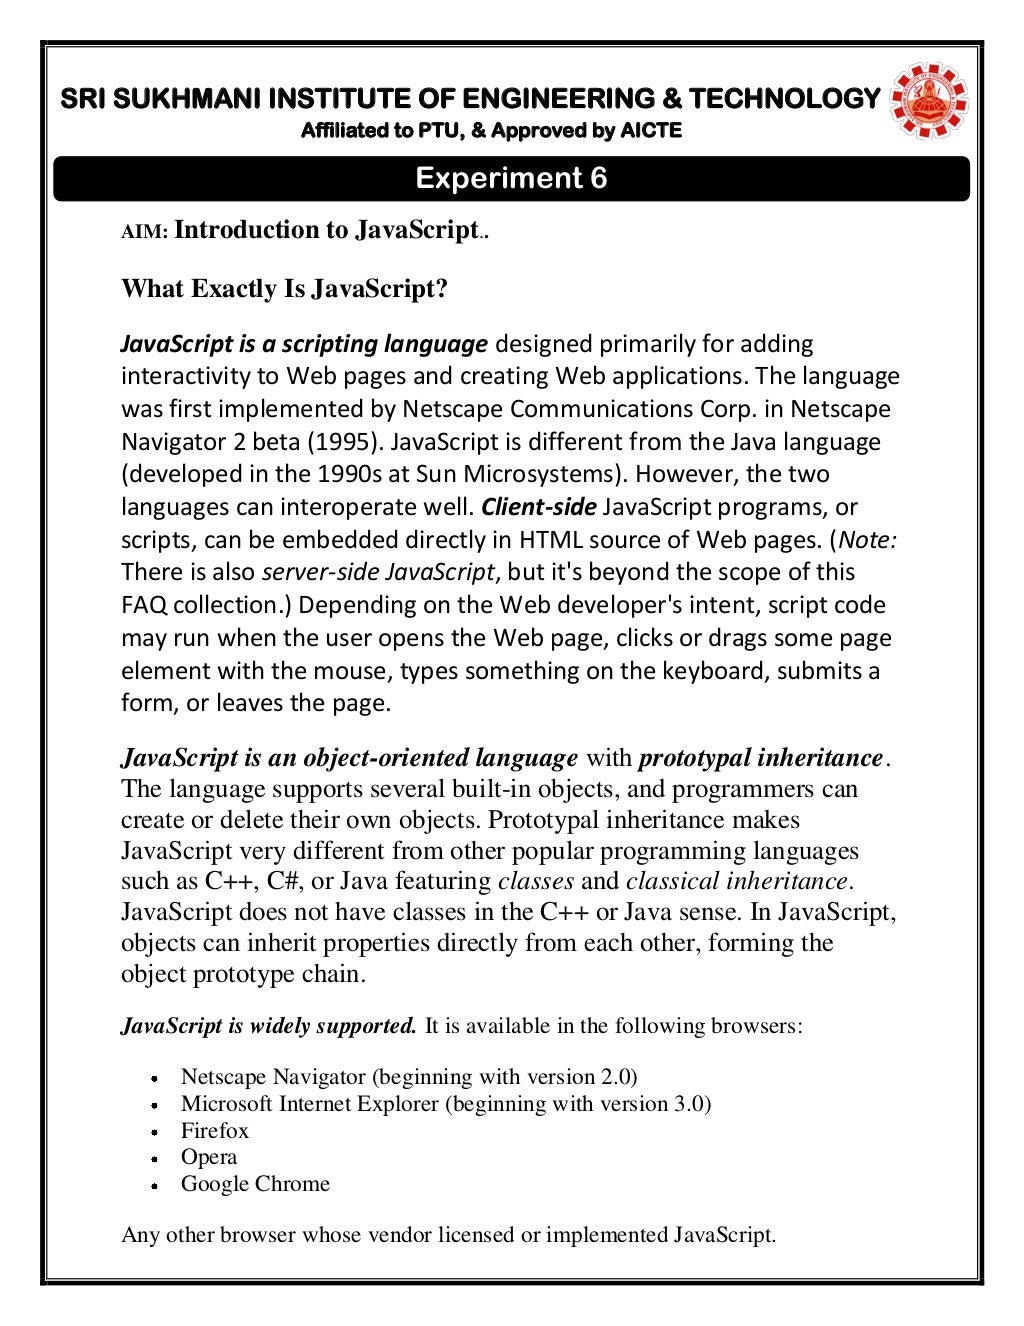 html practical assignment pdf